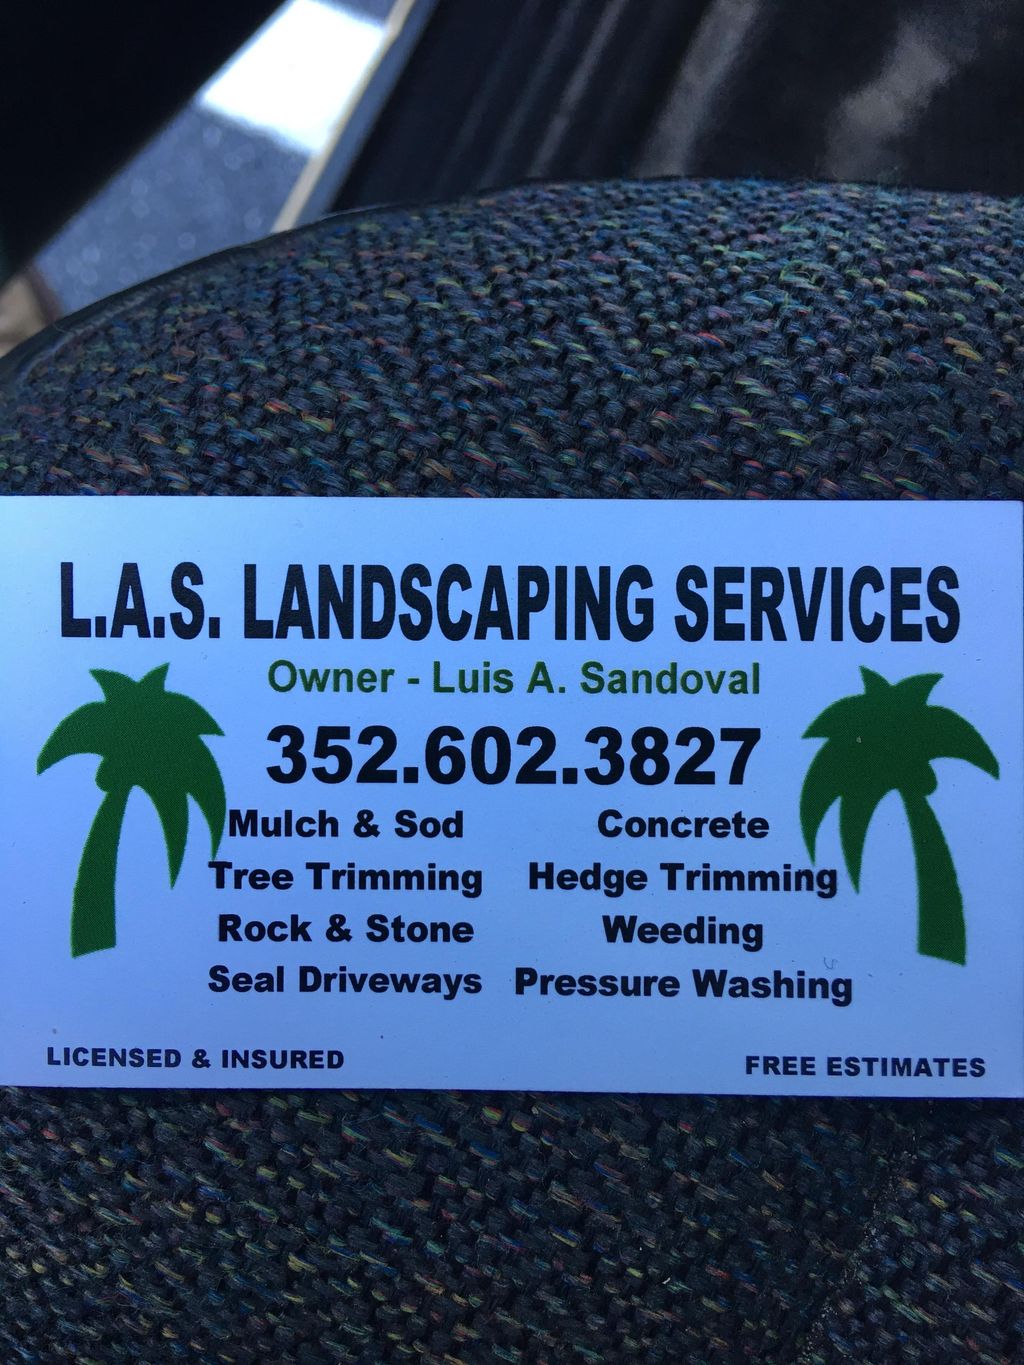 L.A.S Landscaping Services